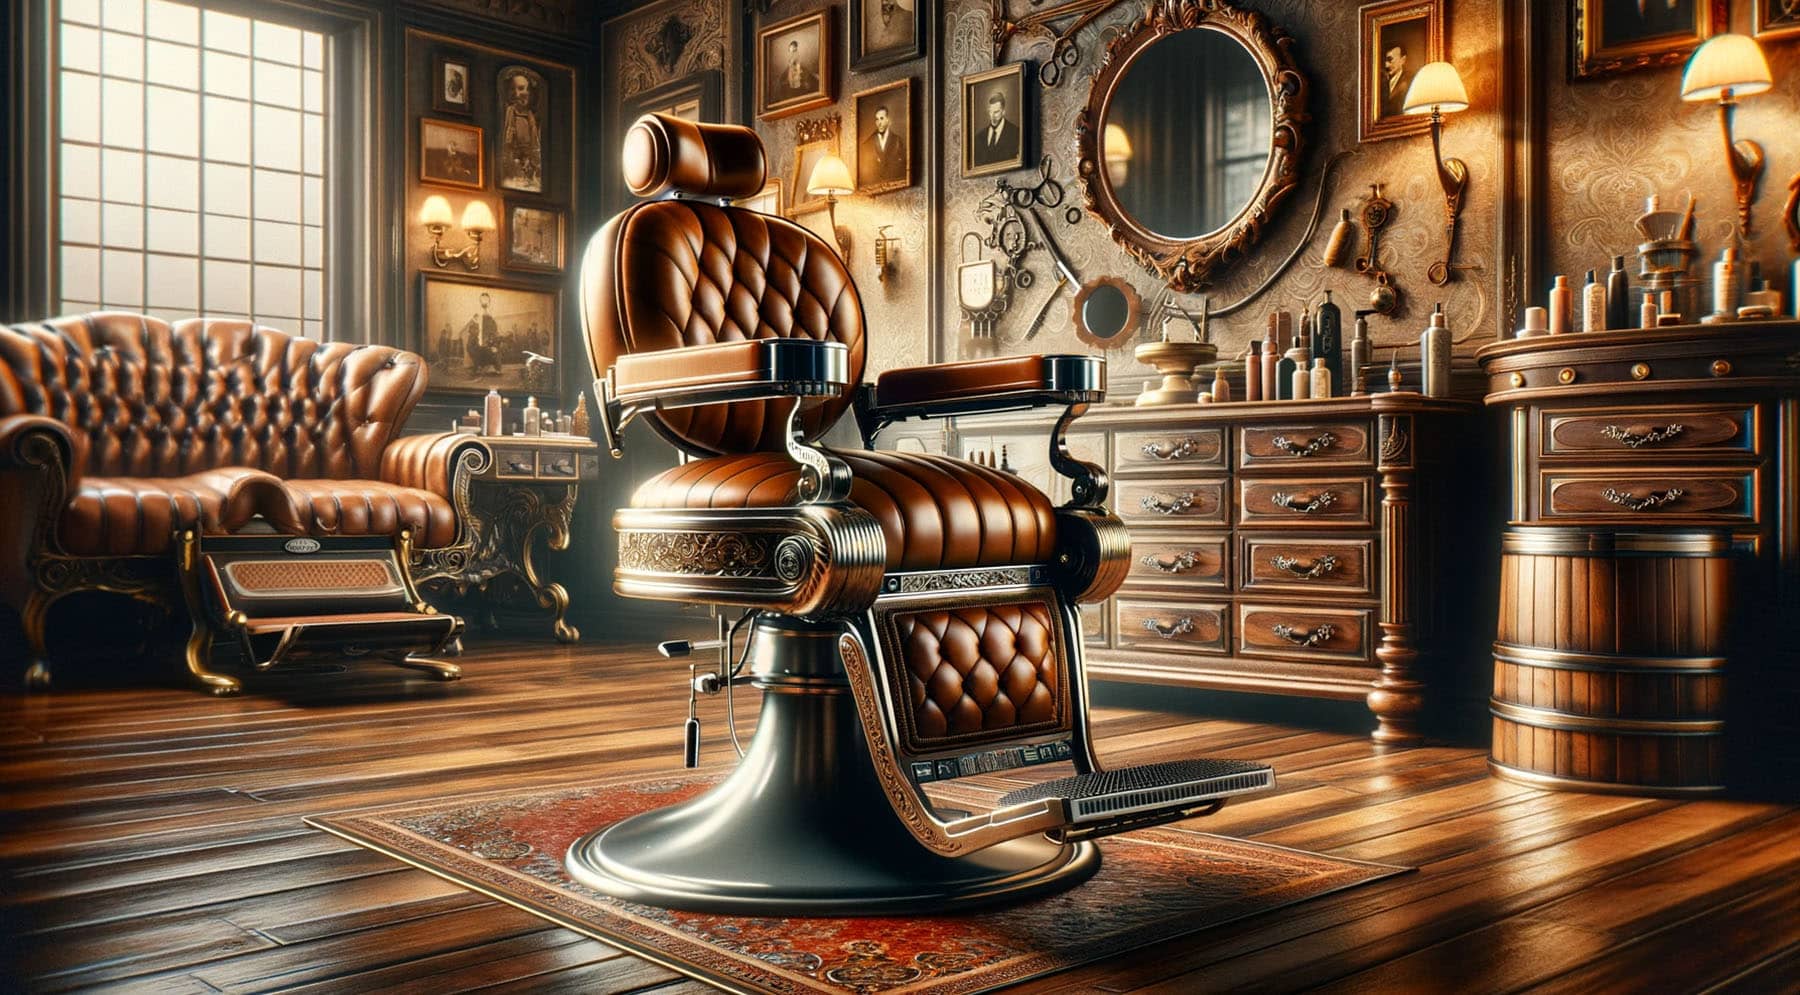 Vintage barber chair in classic barbershop setting, highlighting craftsmanship and timeless elegance of antique Belmont, Emil J Paidar, and Koken chairs.